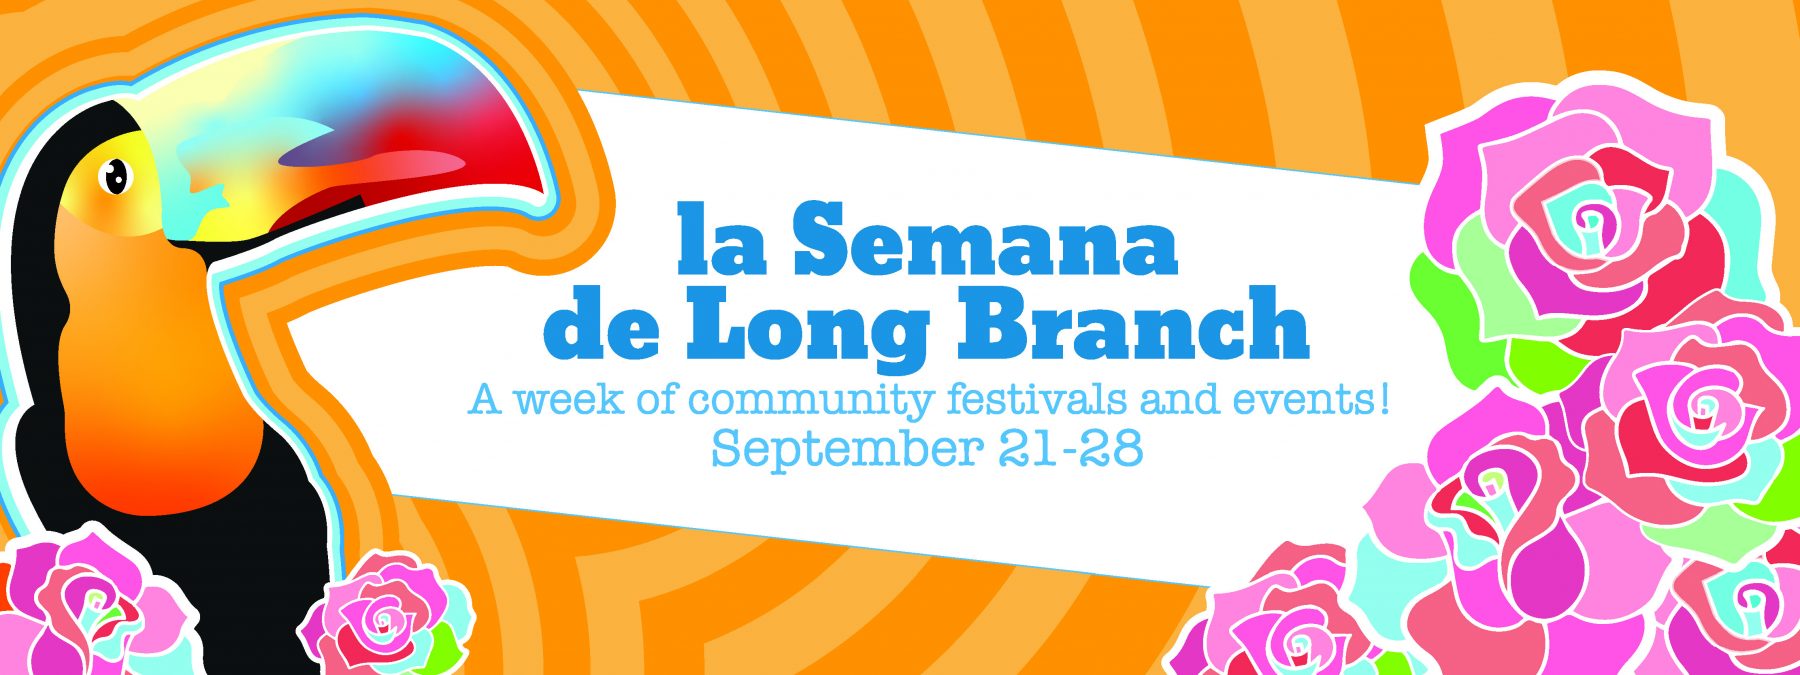 long branch placemaking festival